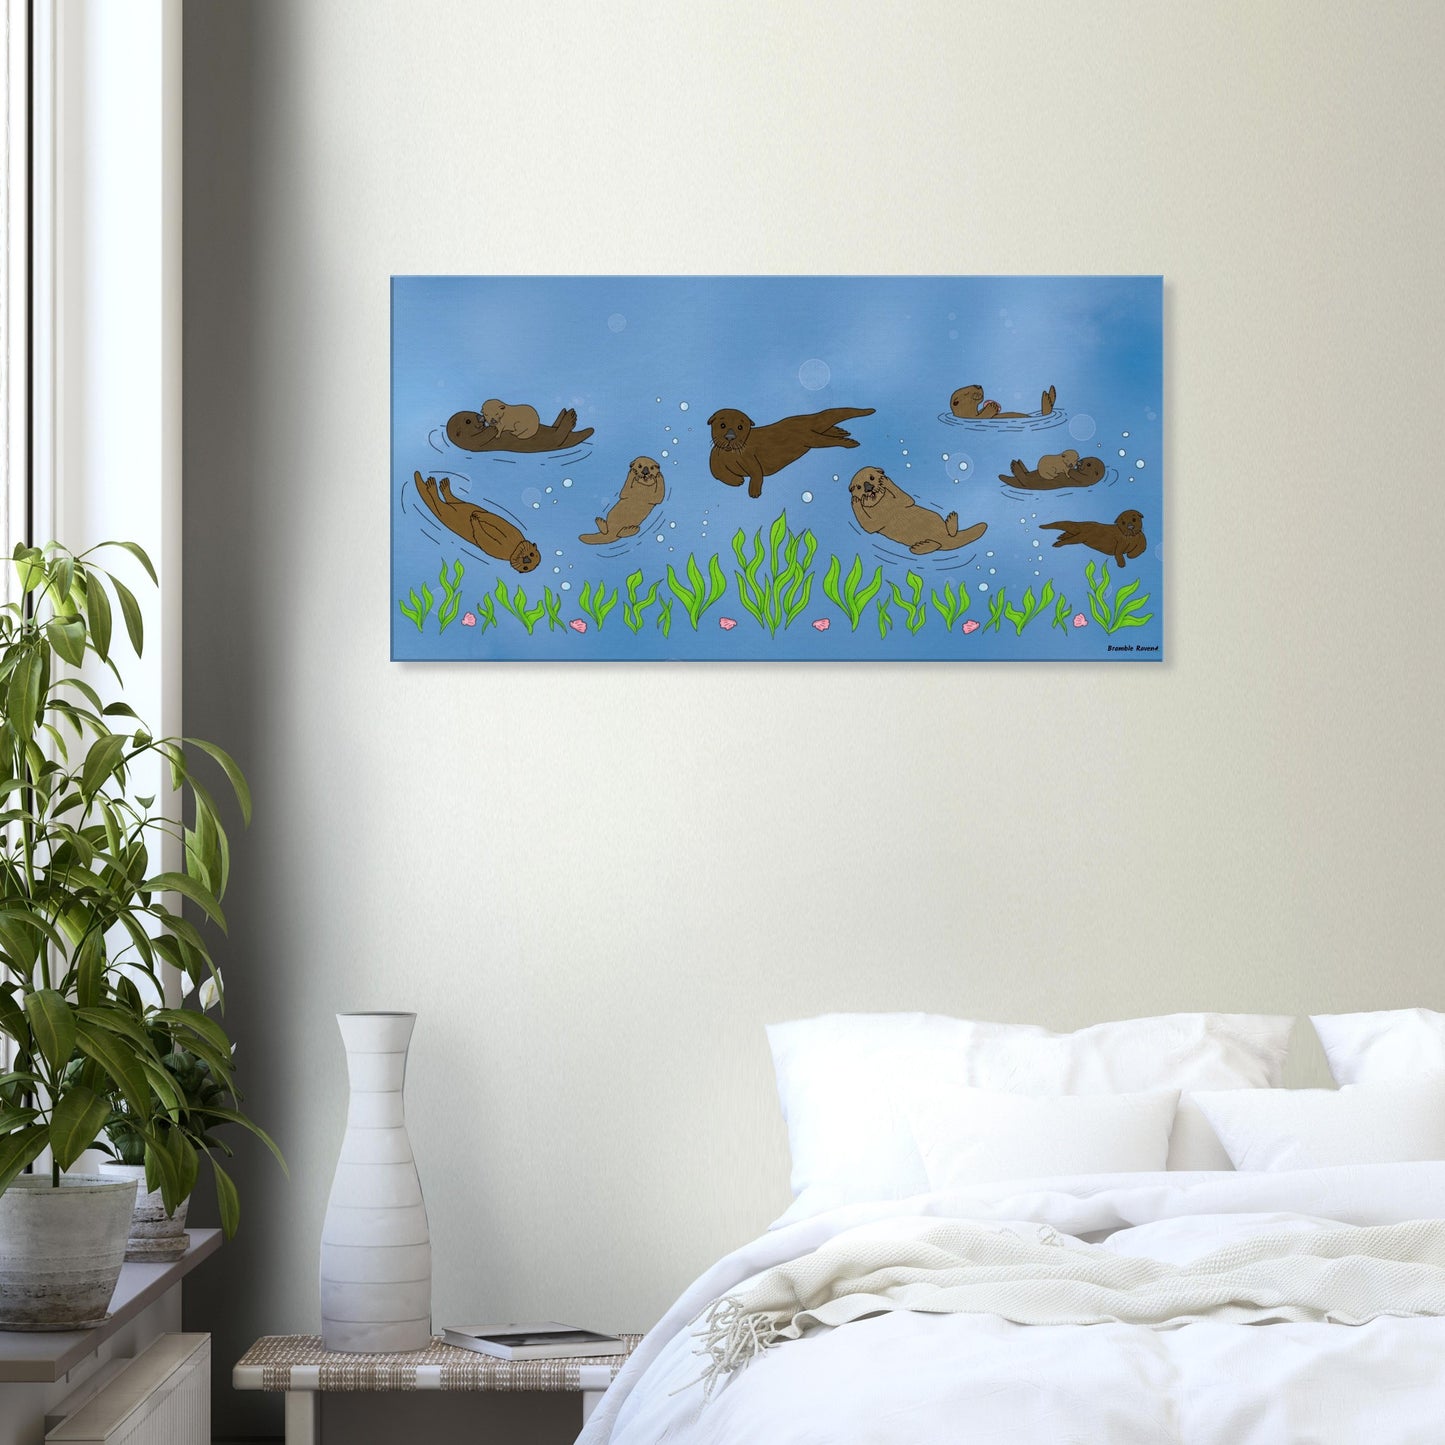 20 by 40 inch slim canvas wall art print of sea otters swimming along the seabed. Shown on wall above white bed, end table and potted plant.